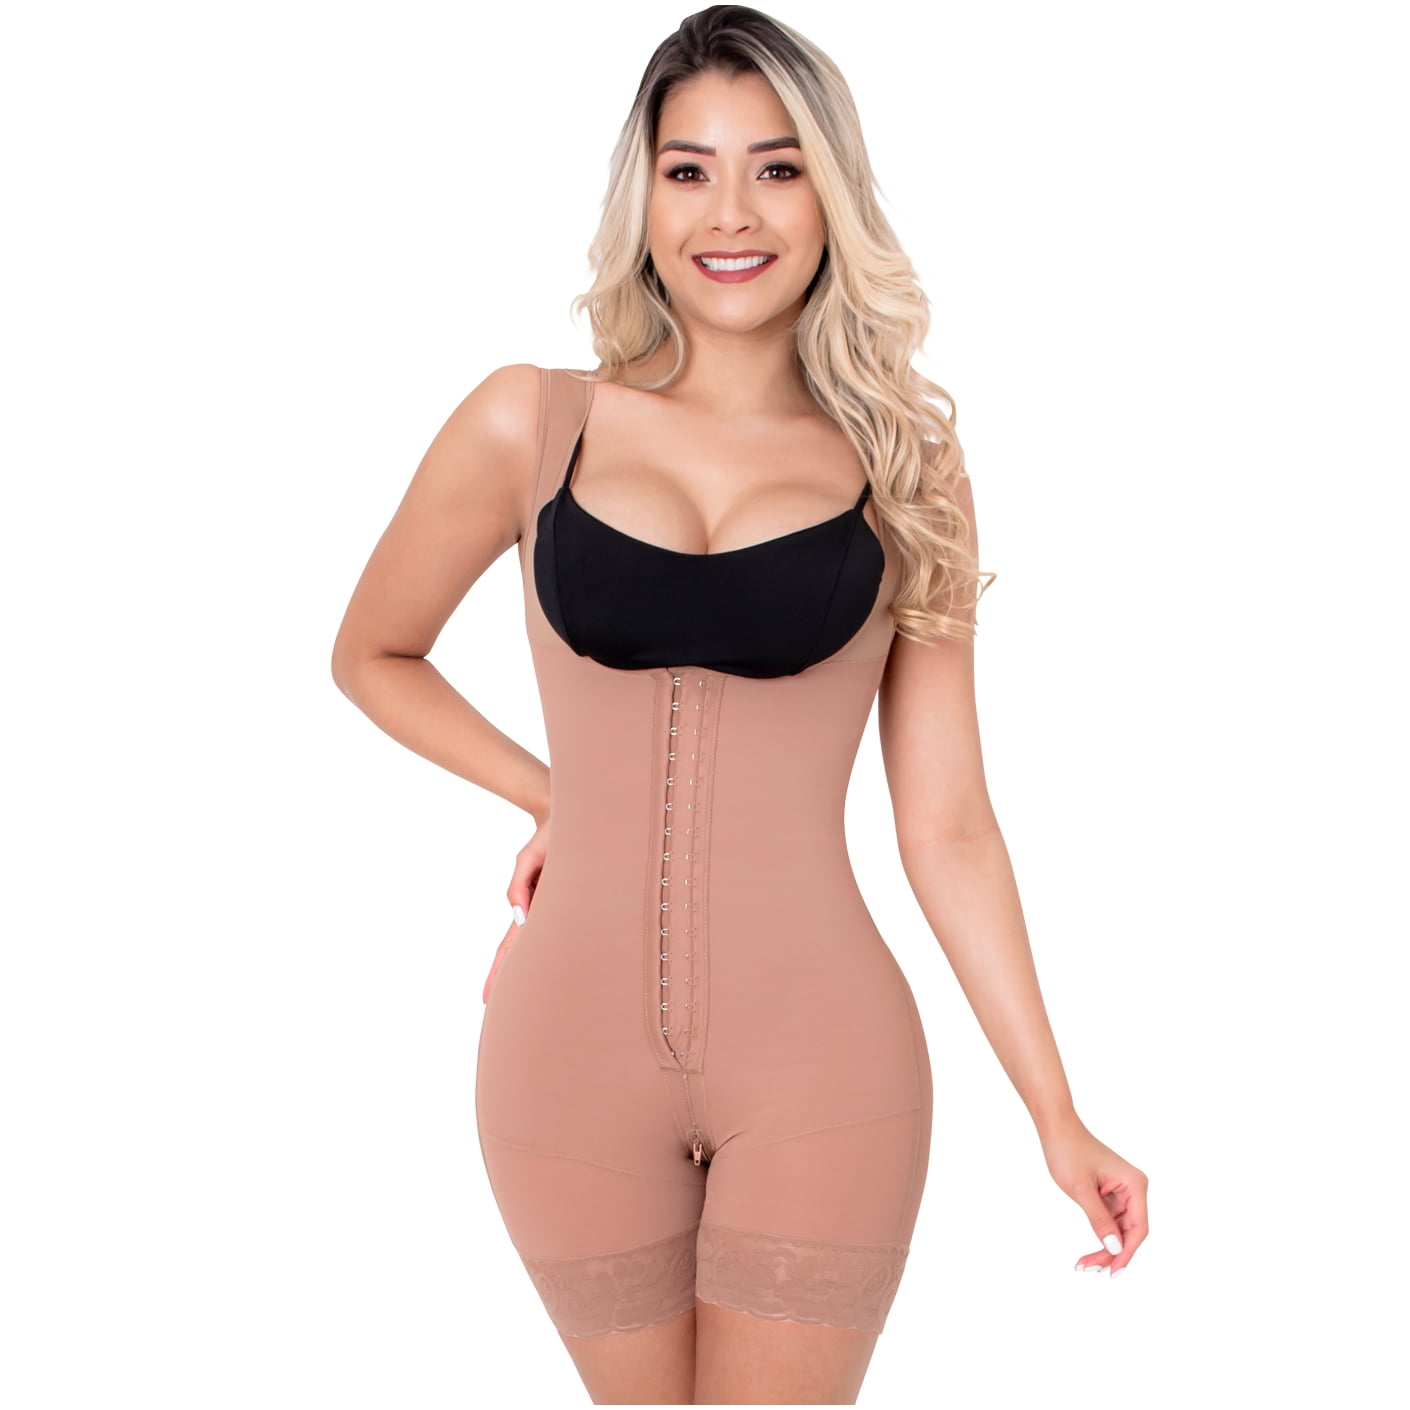 Premium Girdle for Women Fajas Colombianas Fresh and Light